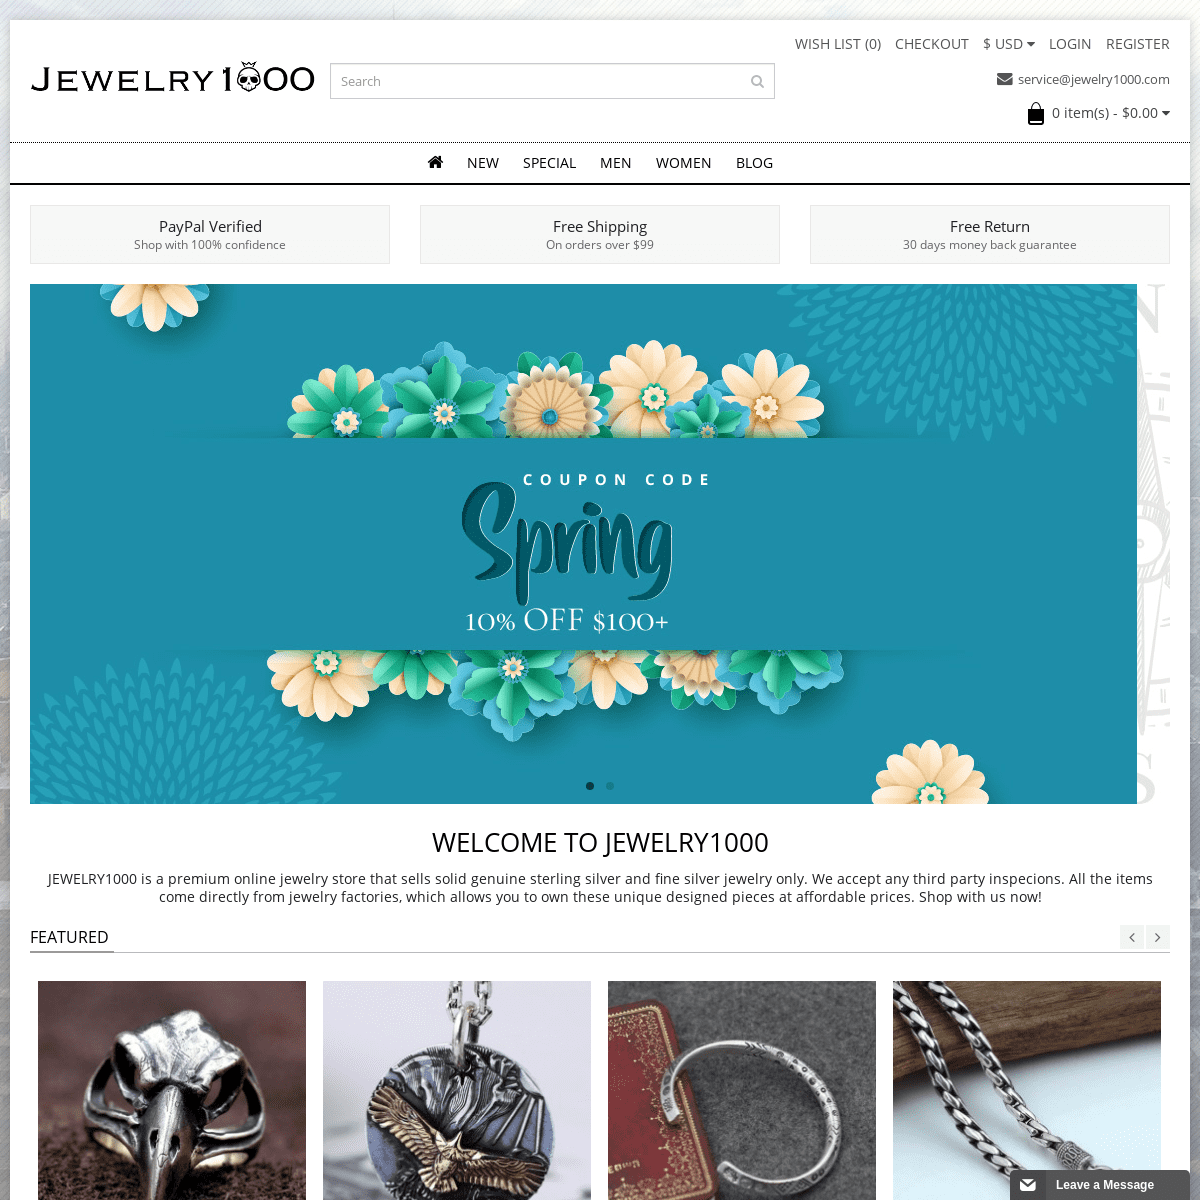 A complete backup of jewelry1000.com